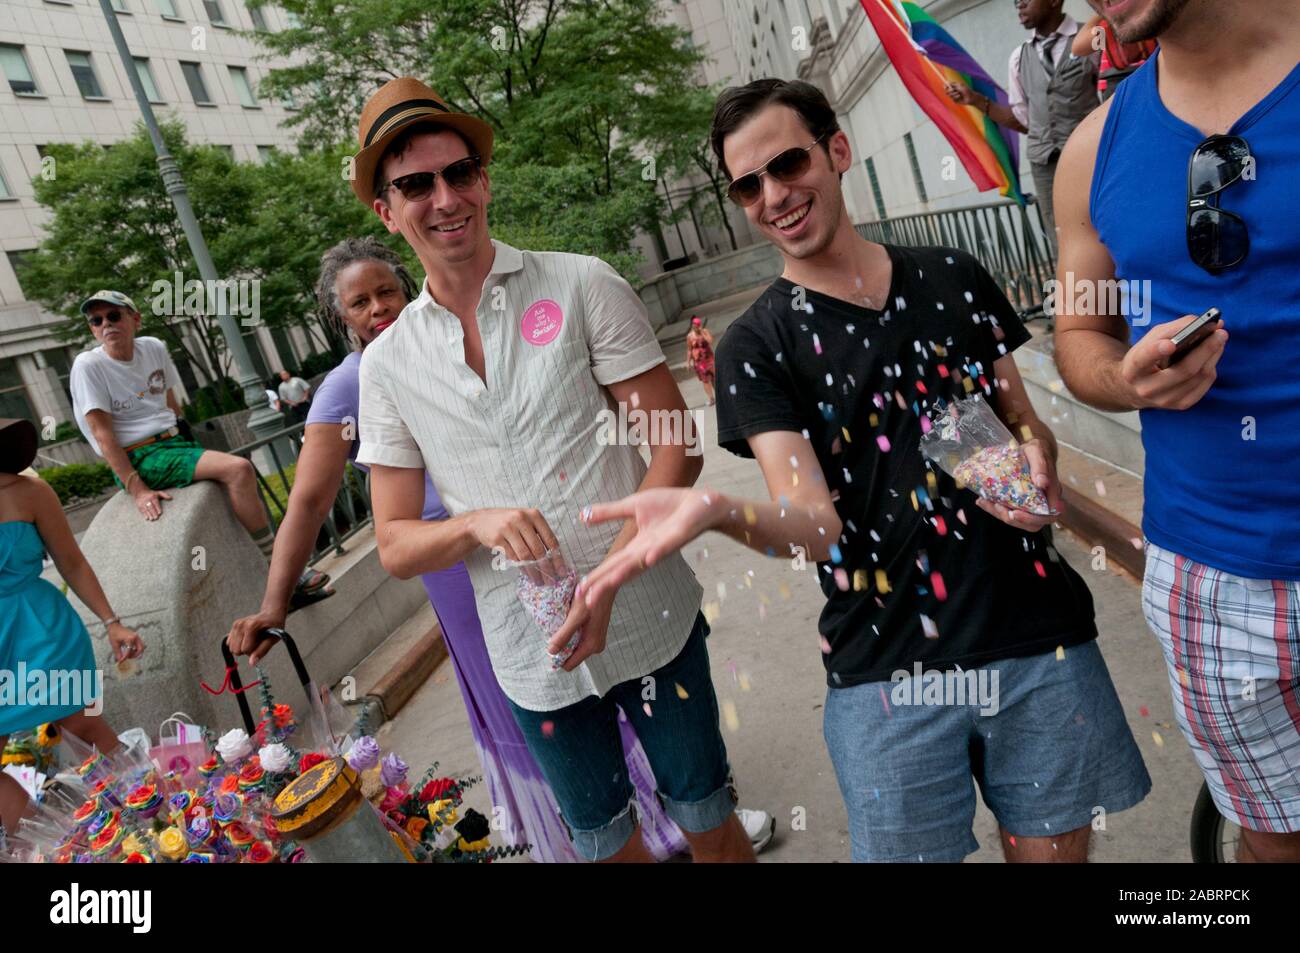 Supporters of same-sex marriage celebrate outside the Manhattan City Clerk's office on the first day of legal same-sex marriage in New York State, USA Stock Photo